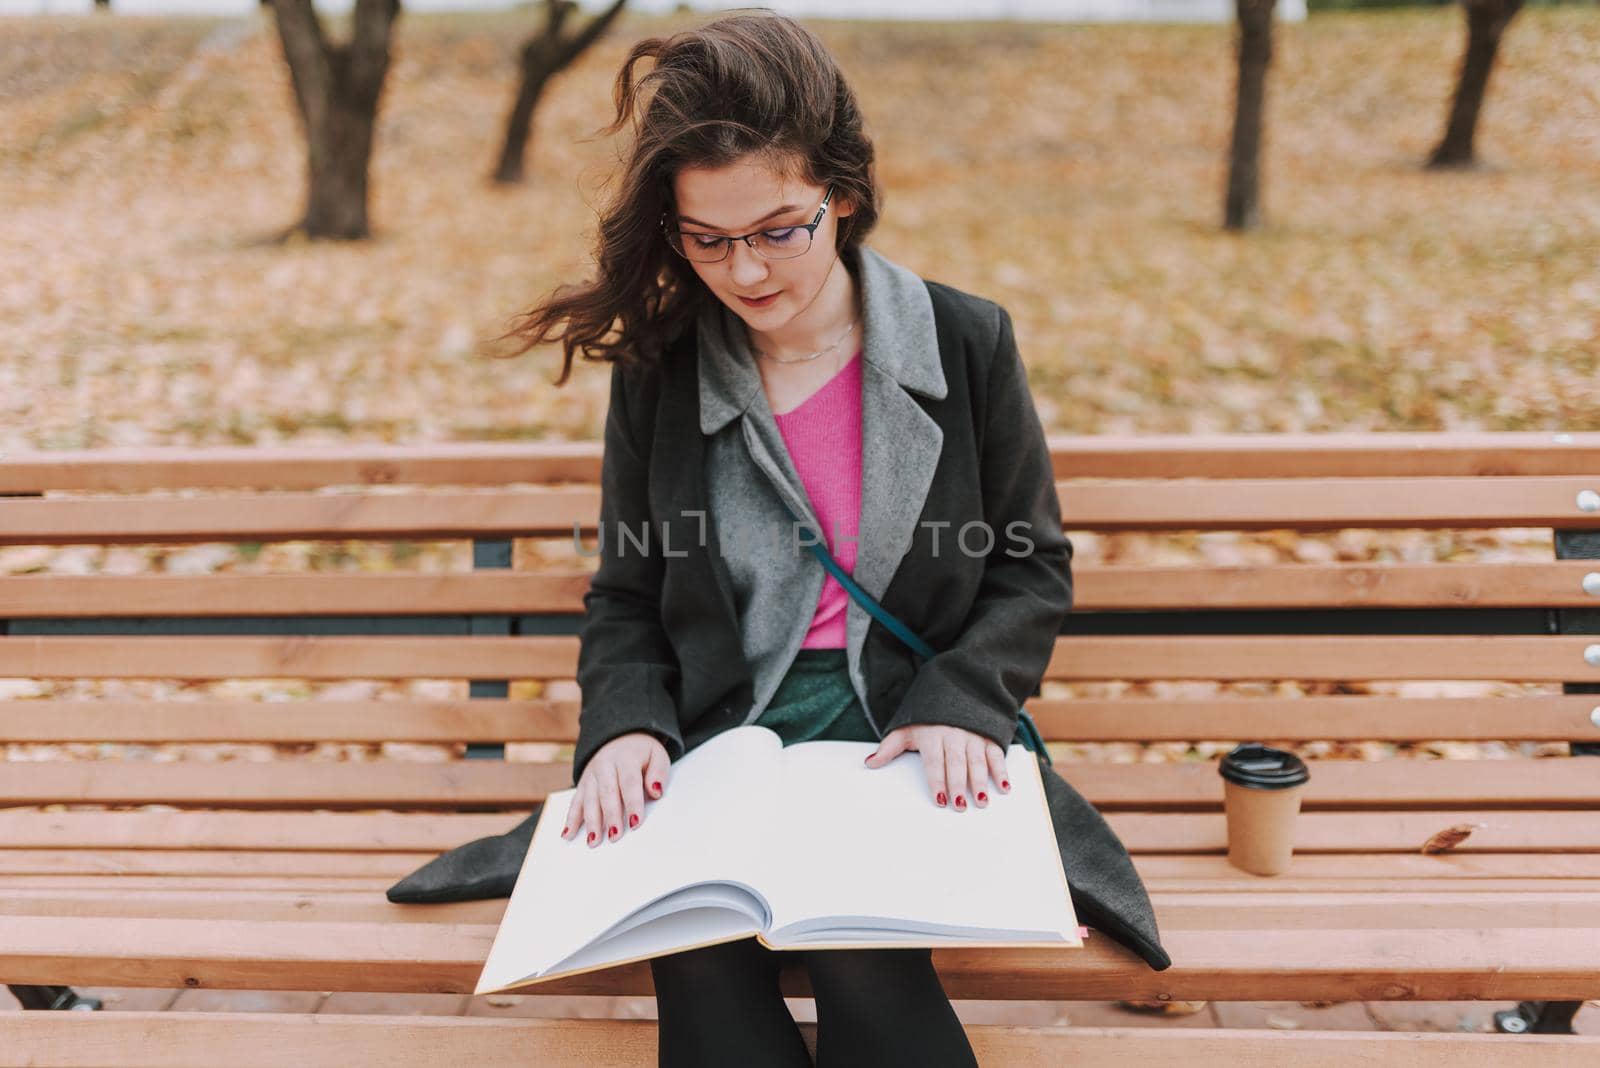 Calm student on windy day studying in the park by monakoartstudio